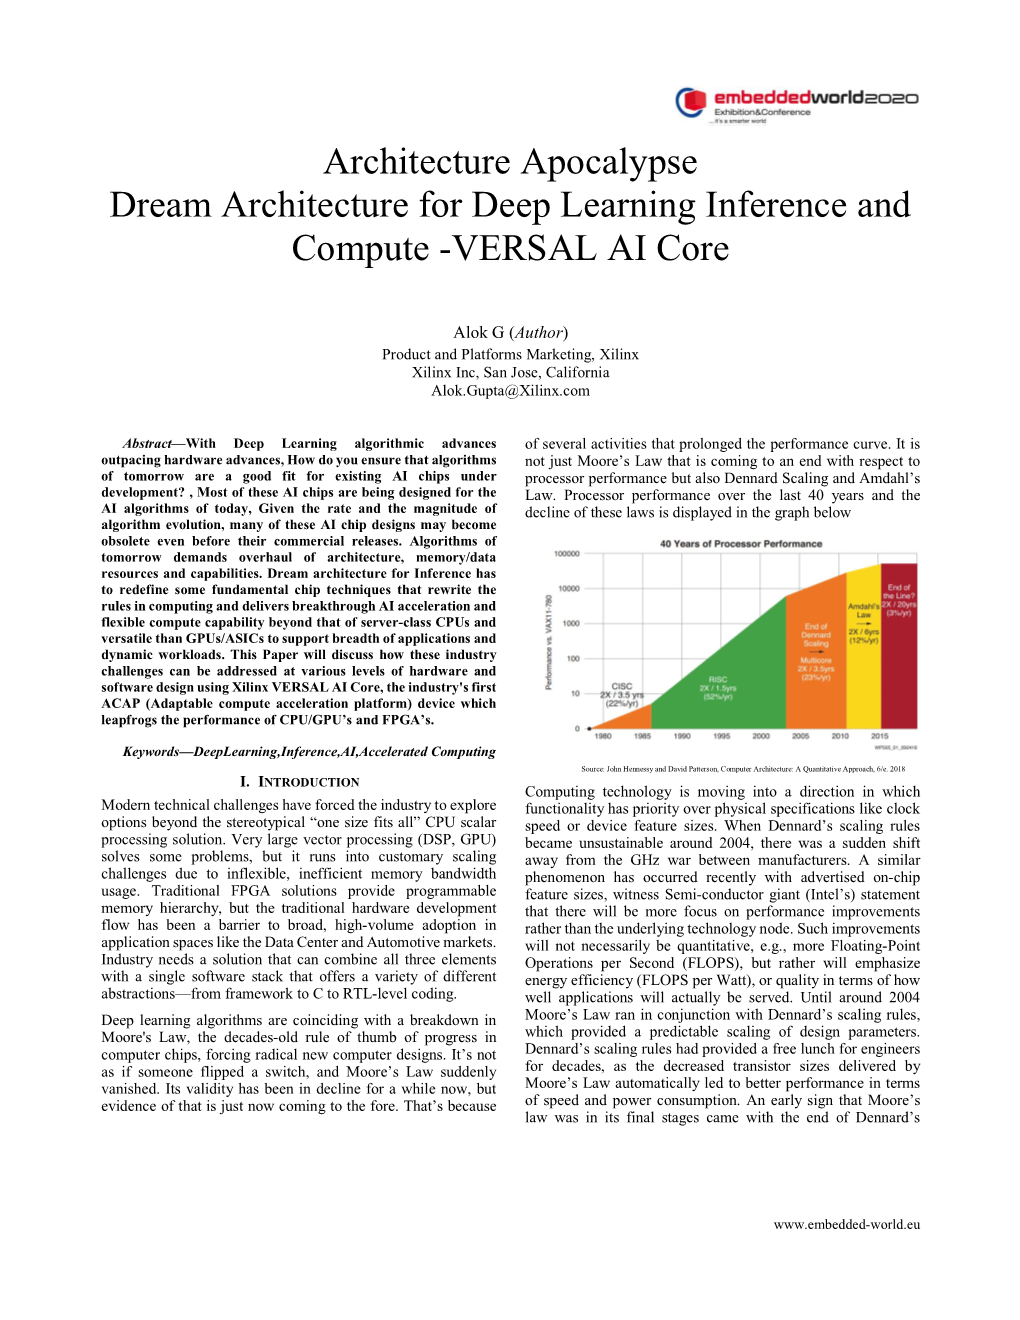 Architecture Apocalypse Dream Architecture for Deep Learning Inference and Compute -VERSAL AI Core